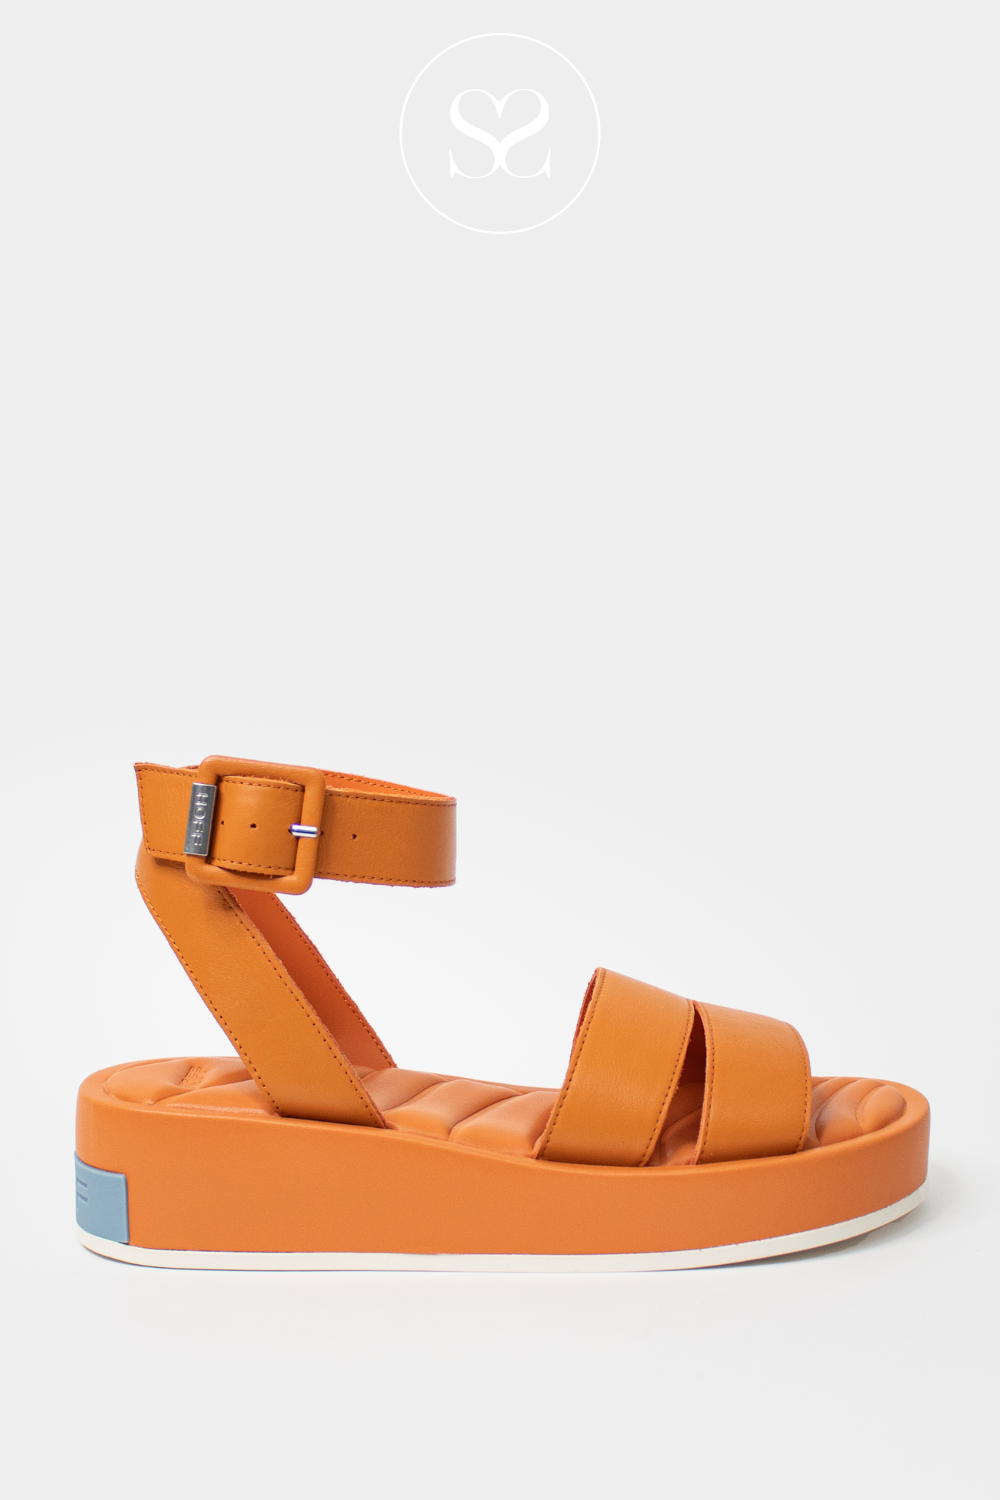 HOFF TOWN SANDALS IN ORANGE LEATHER FOR WOMEN